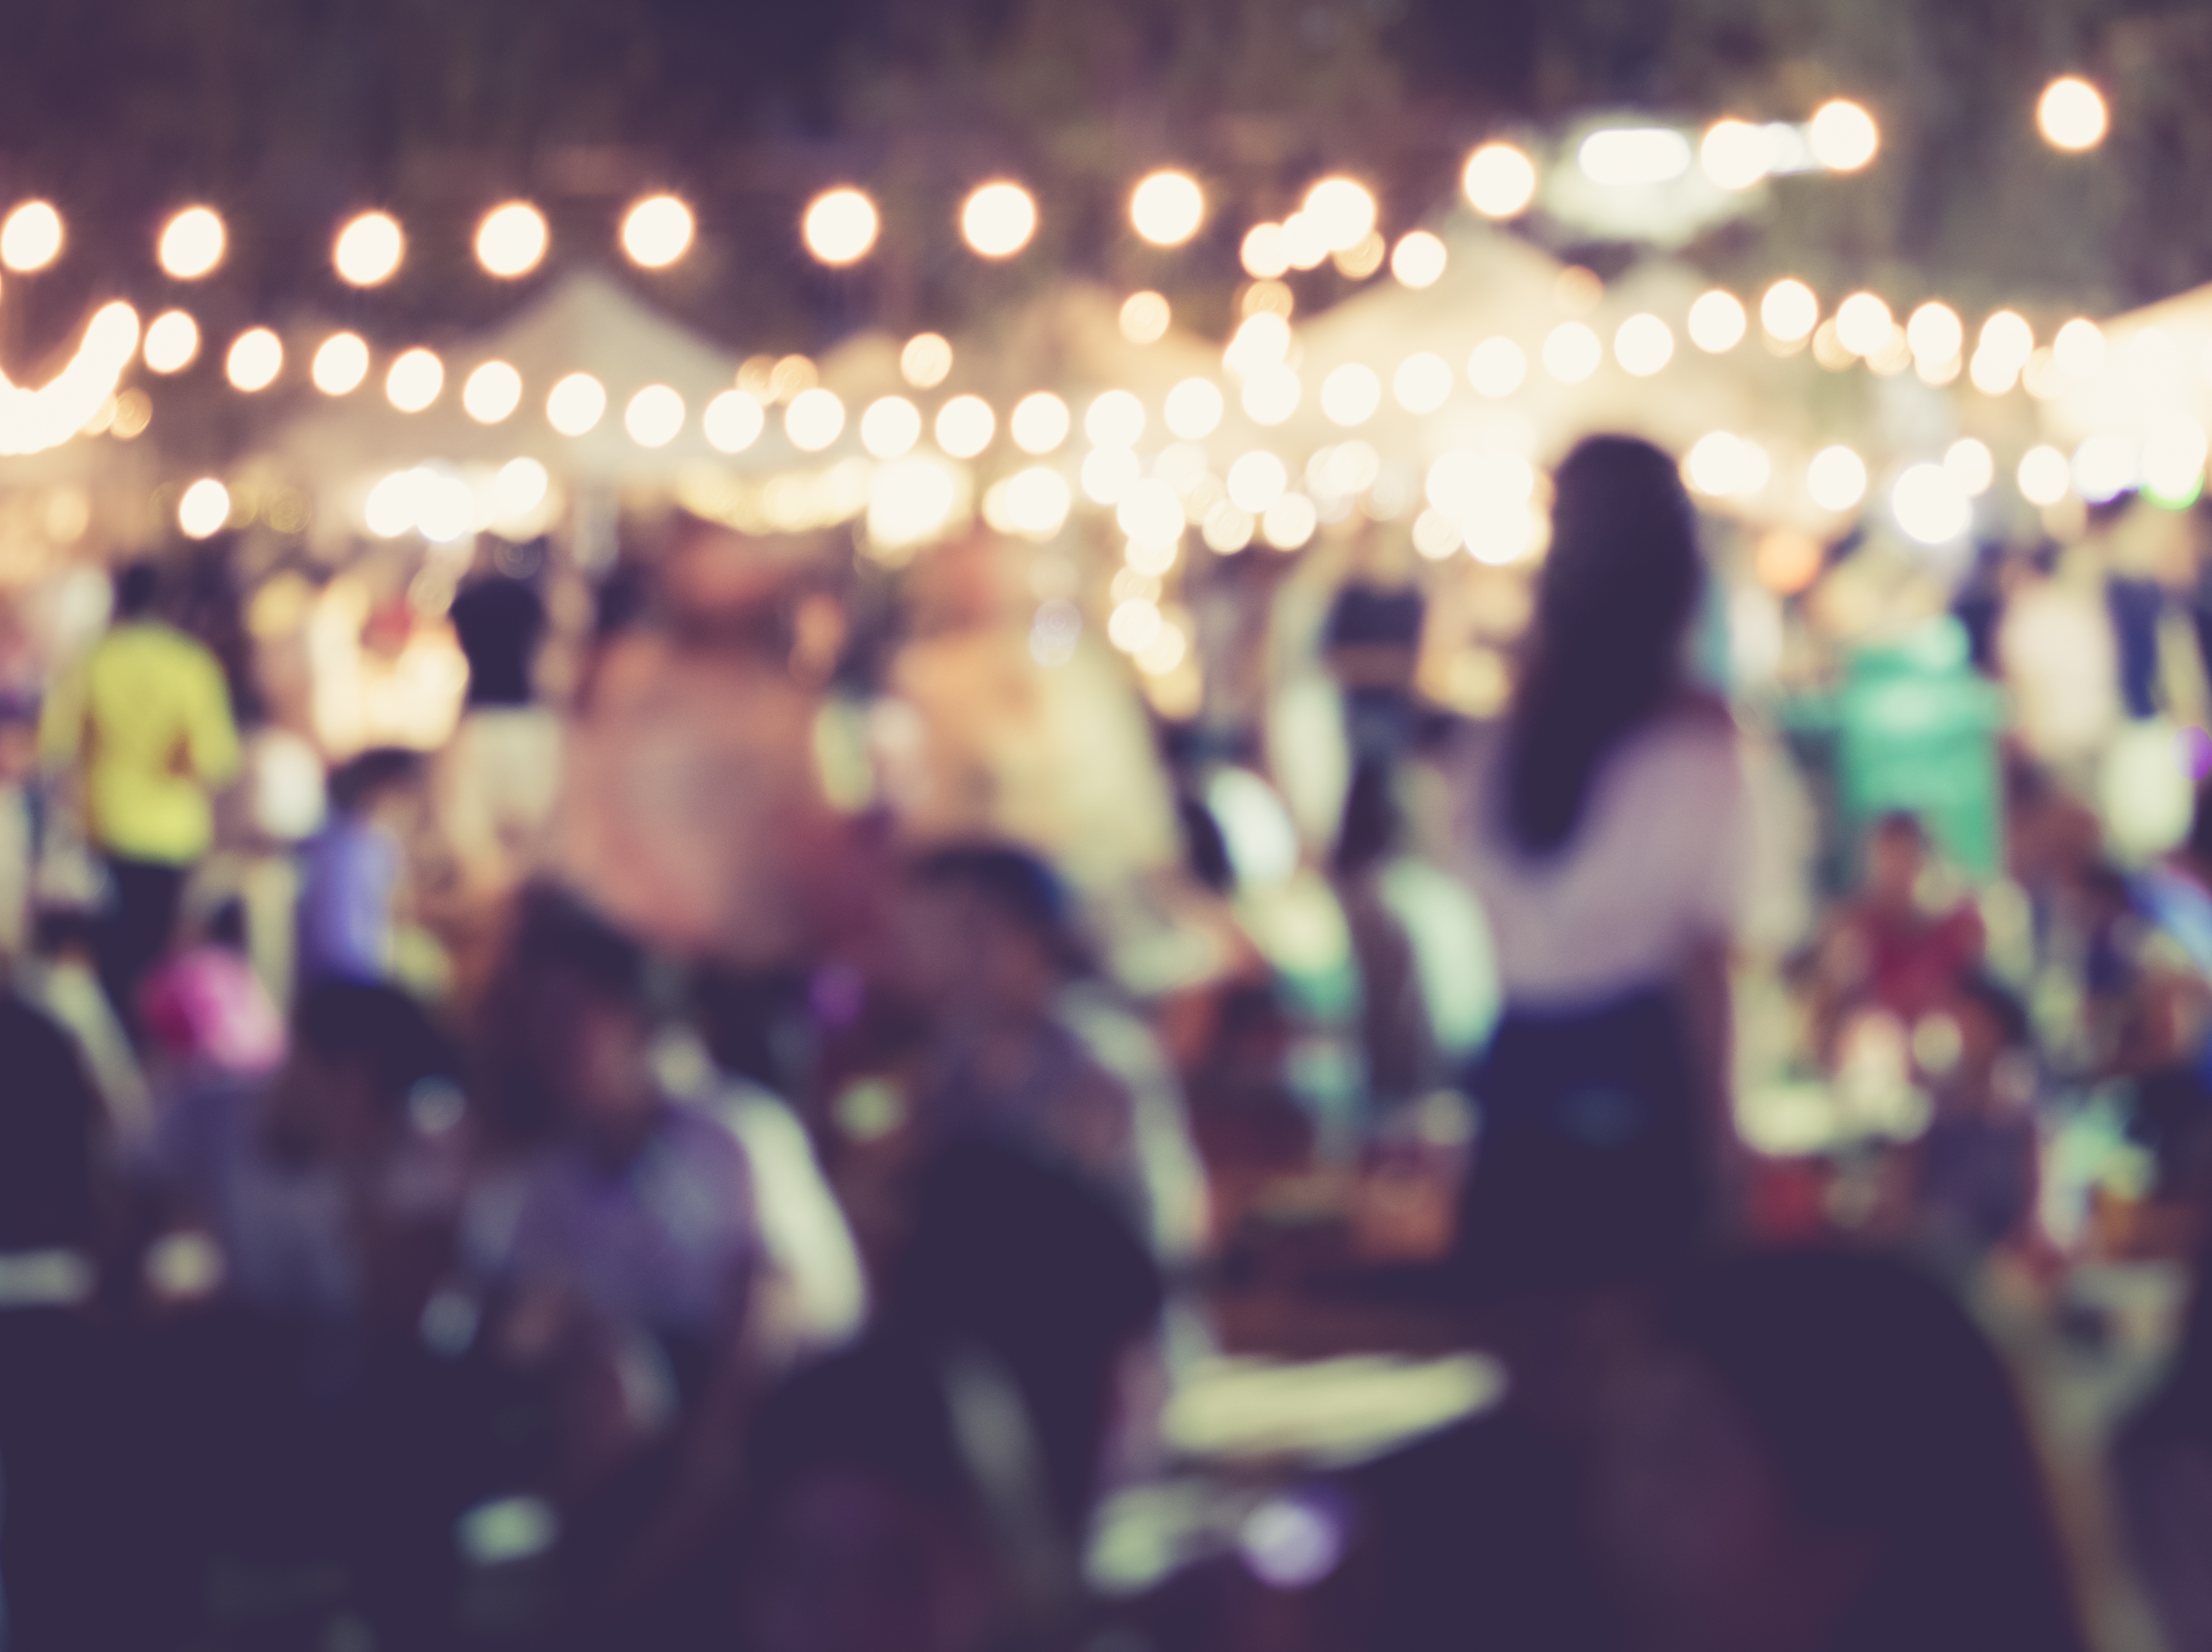 Festival-Event-Party-with-People-Blurred-Background-503861716_4423x3303